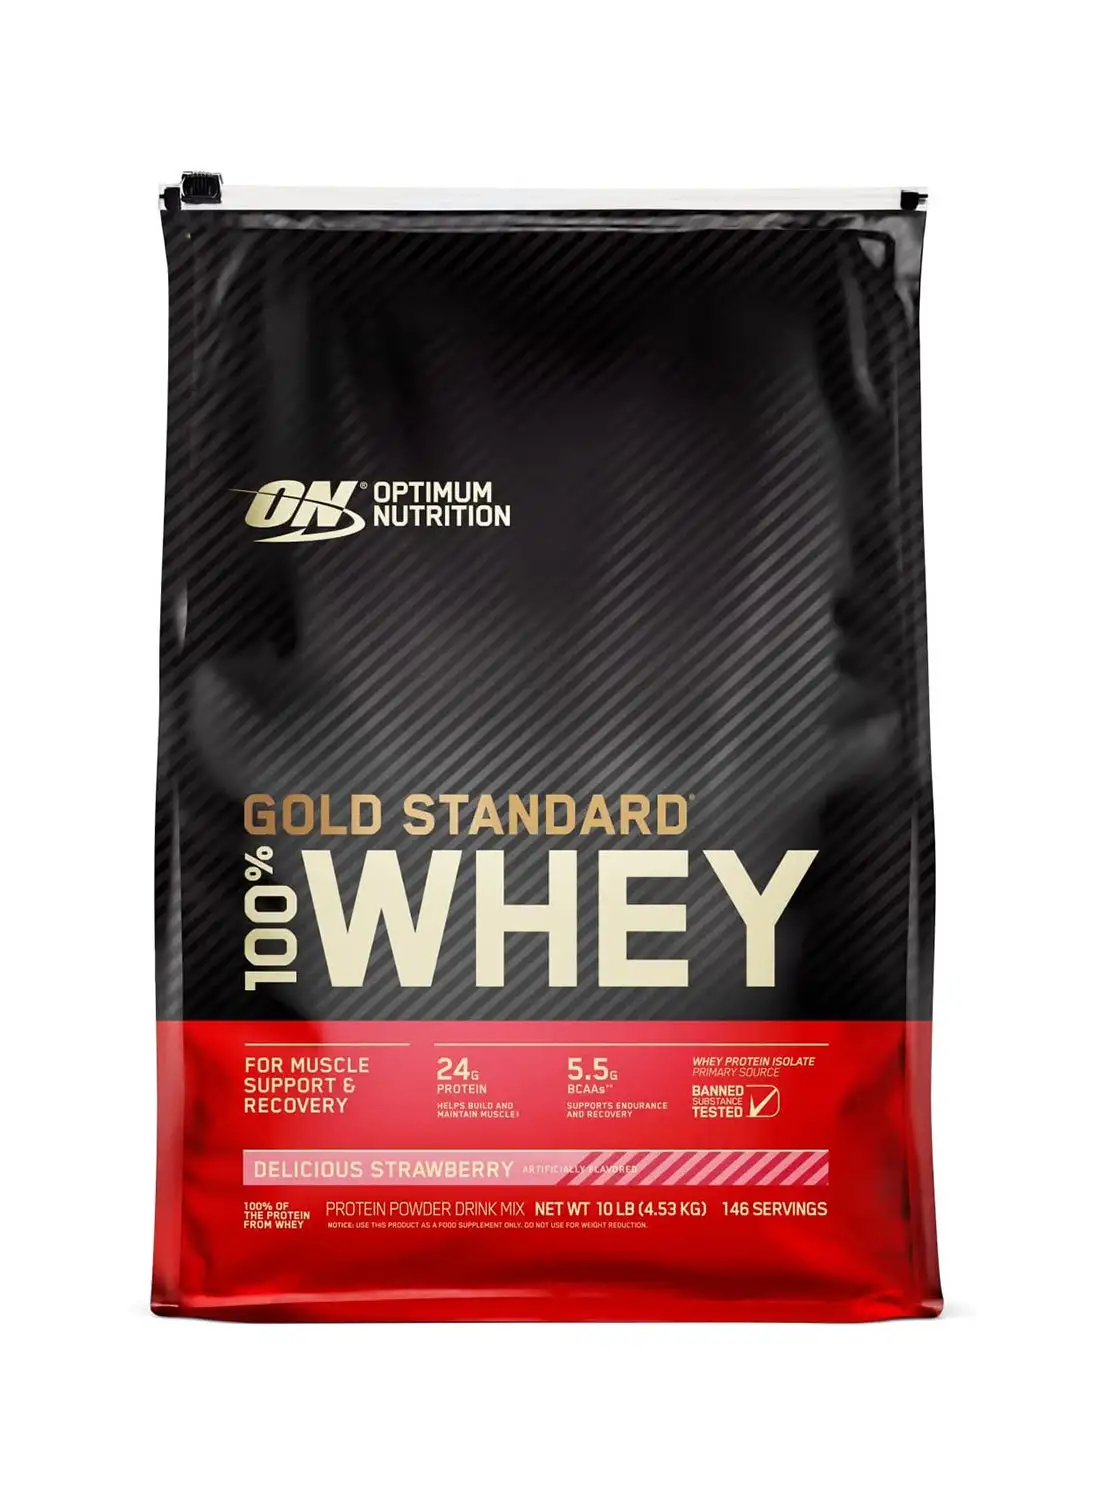 Optimum Nutrition Gold Standard 100% Whey Protein Powder 10 lbs (Delicious Strawberry)